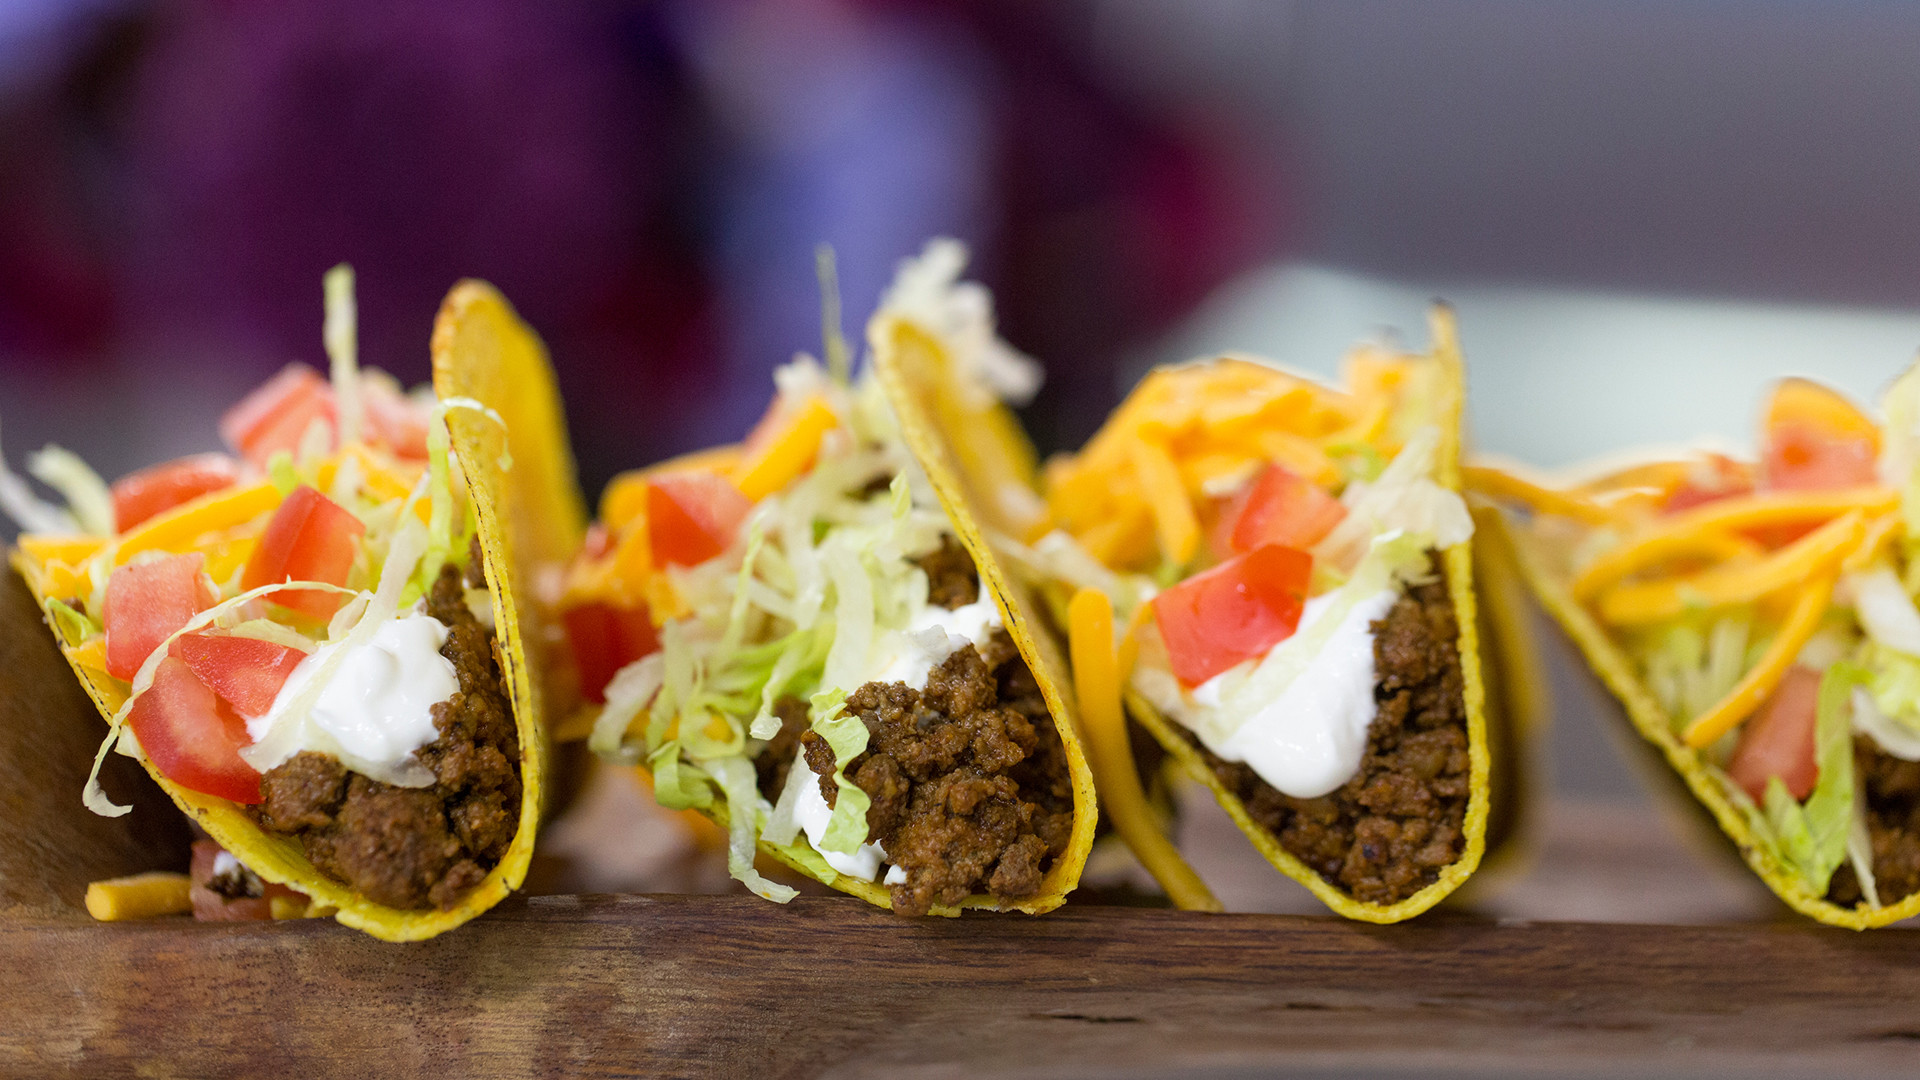 1920x1080 Love Taco Bell tacos? Make a fresh, flavorful, healthy version at home -  TODAY.com